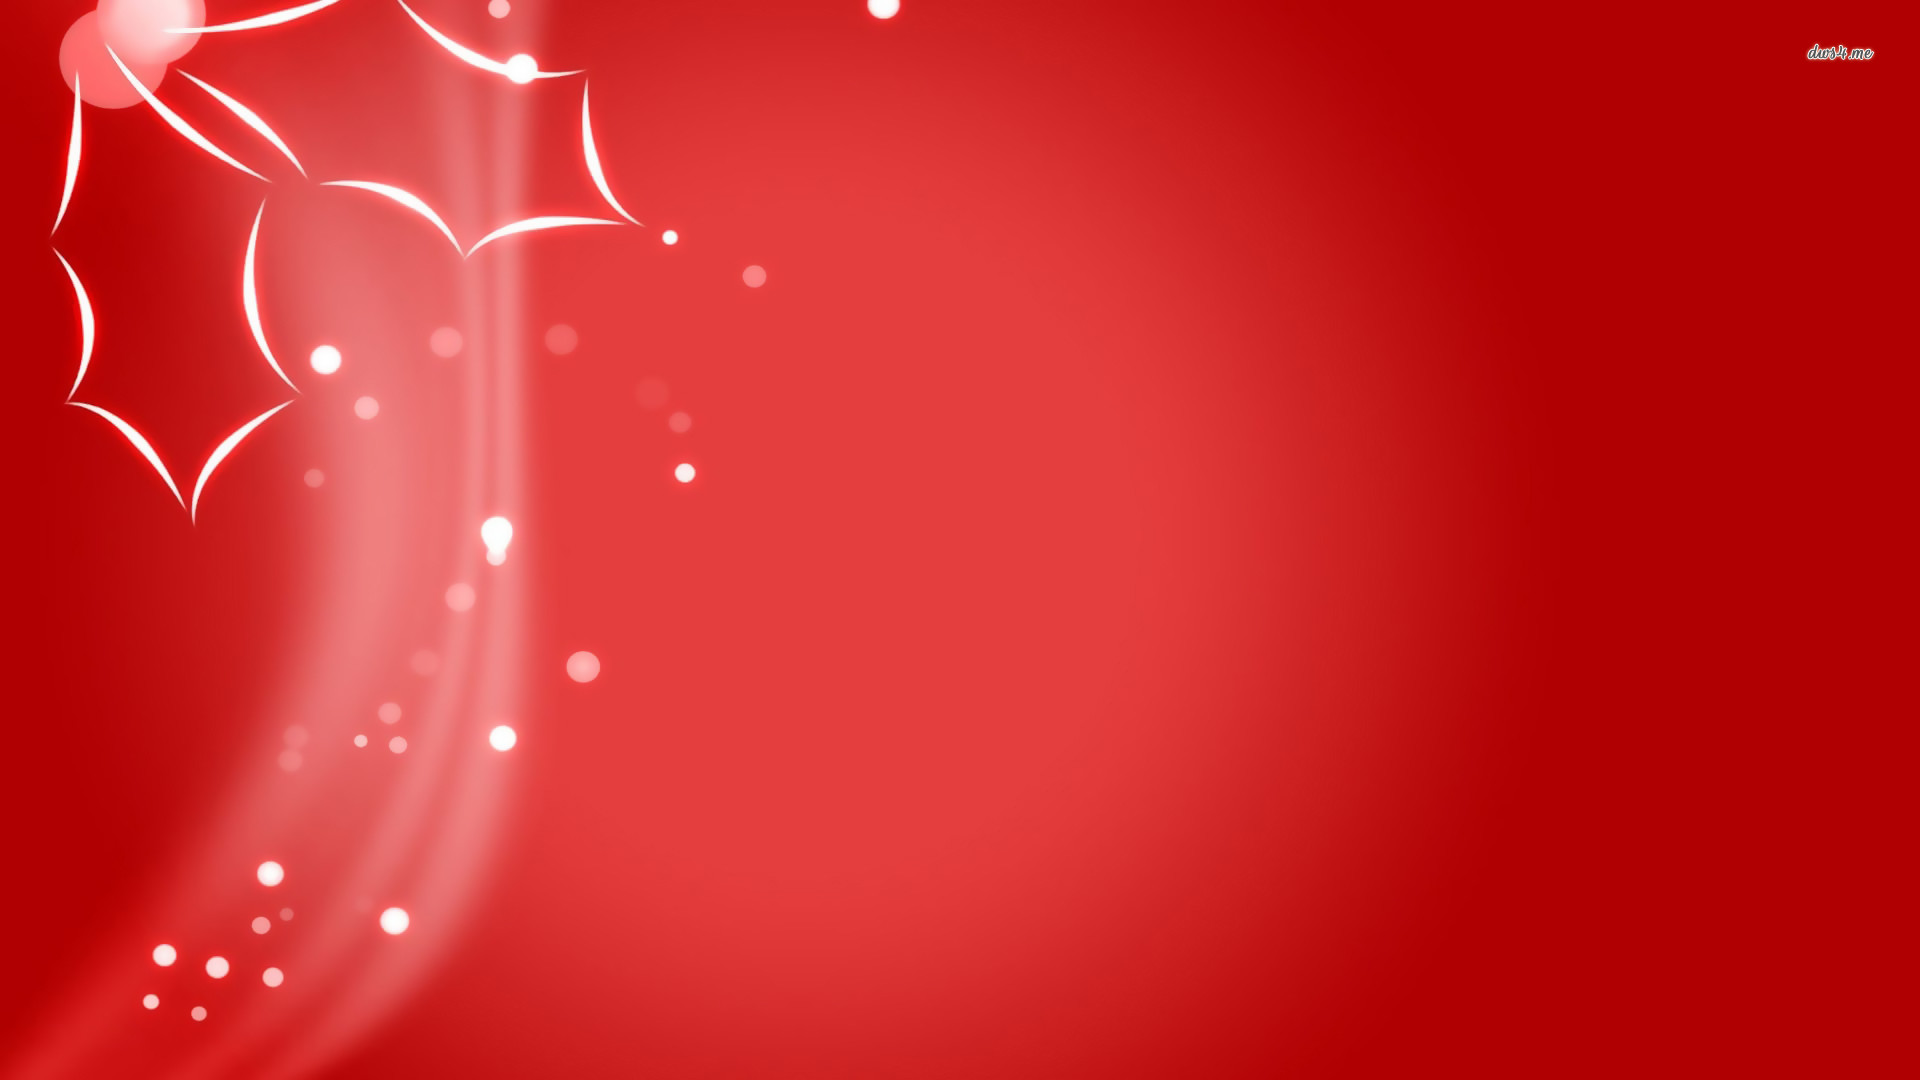 1920x1080 Glowing Circles By The White Mistletoe Wallpaper Holiday